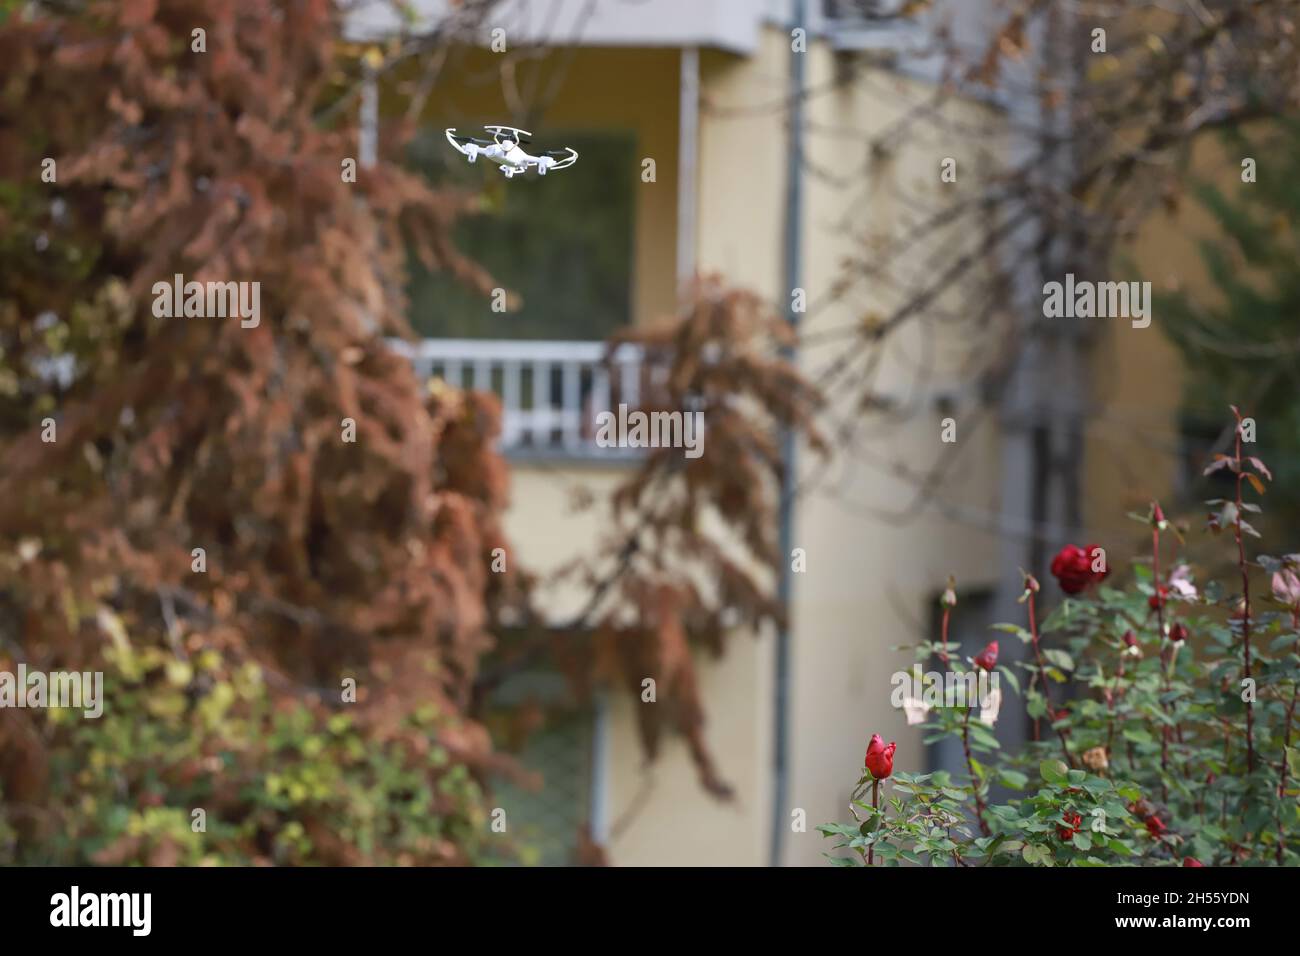 View of drone flying above living area Stock Photo